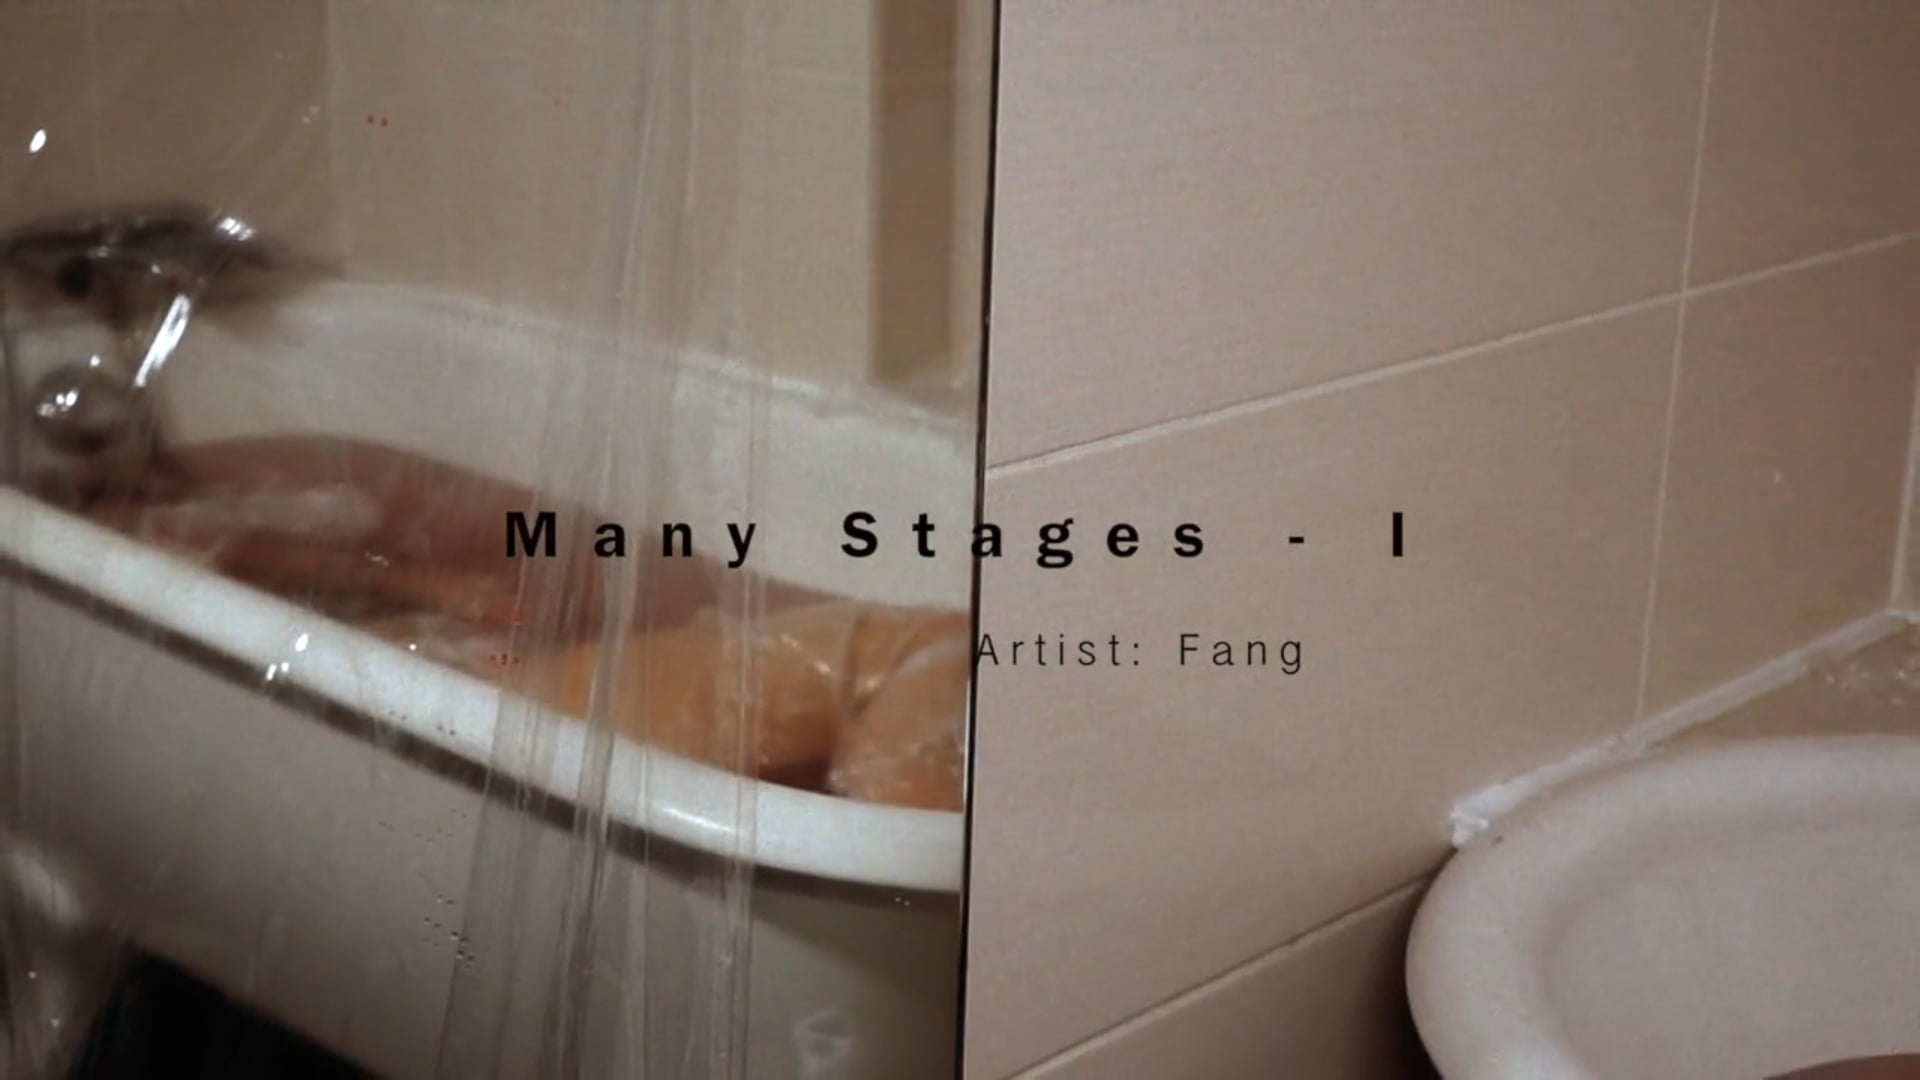 Many stages - I